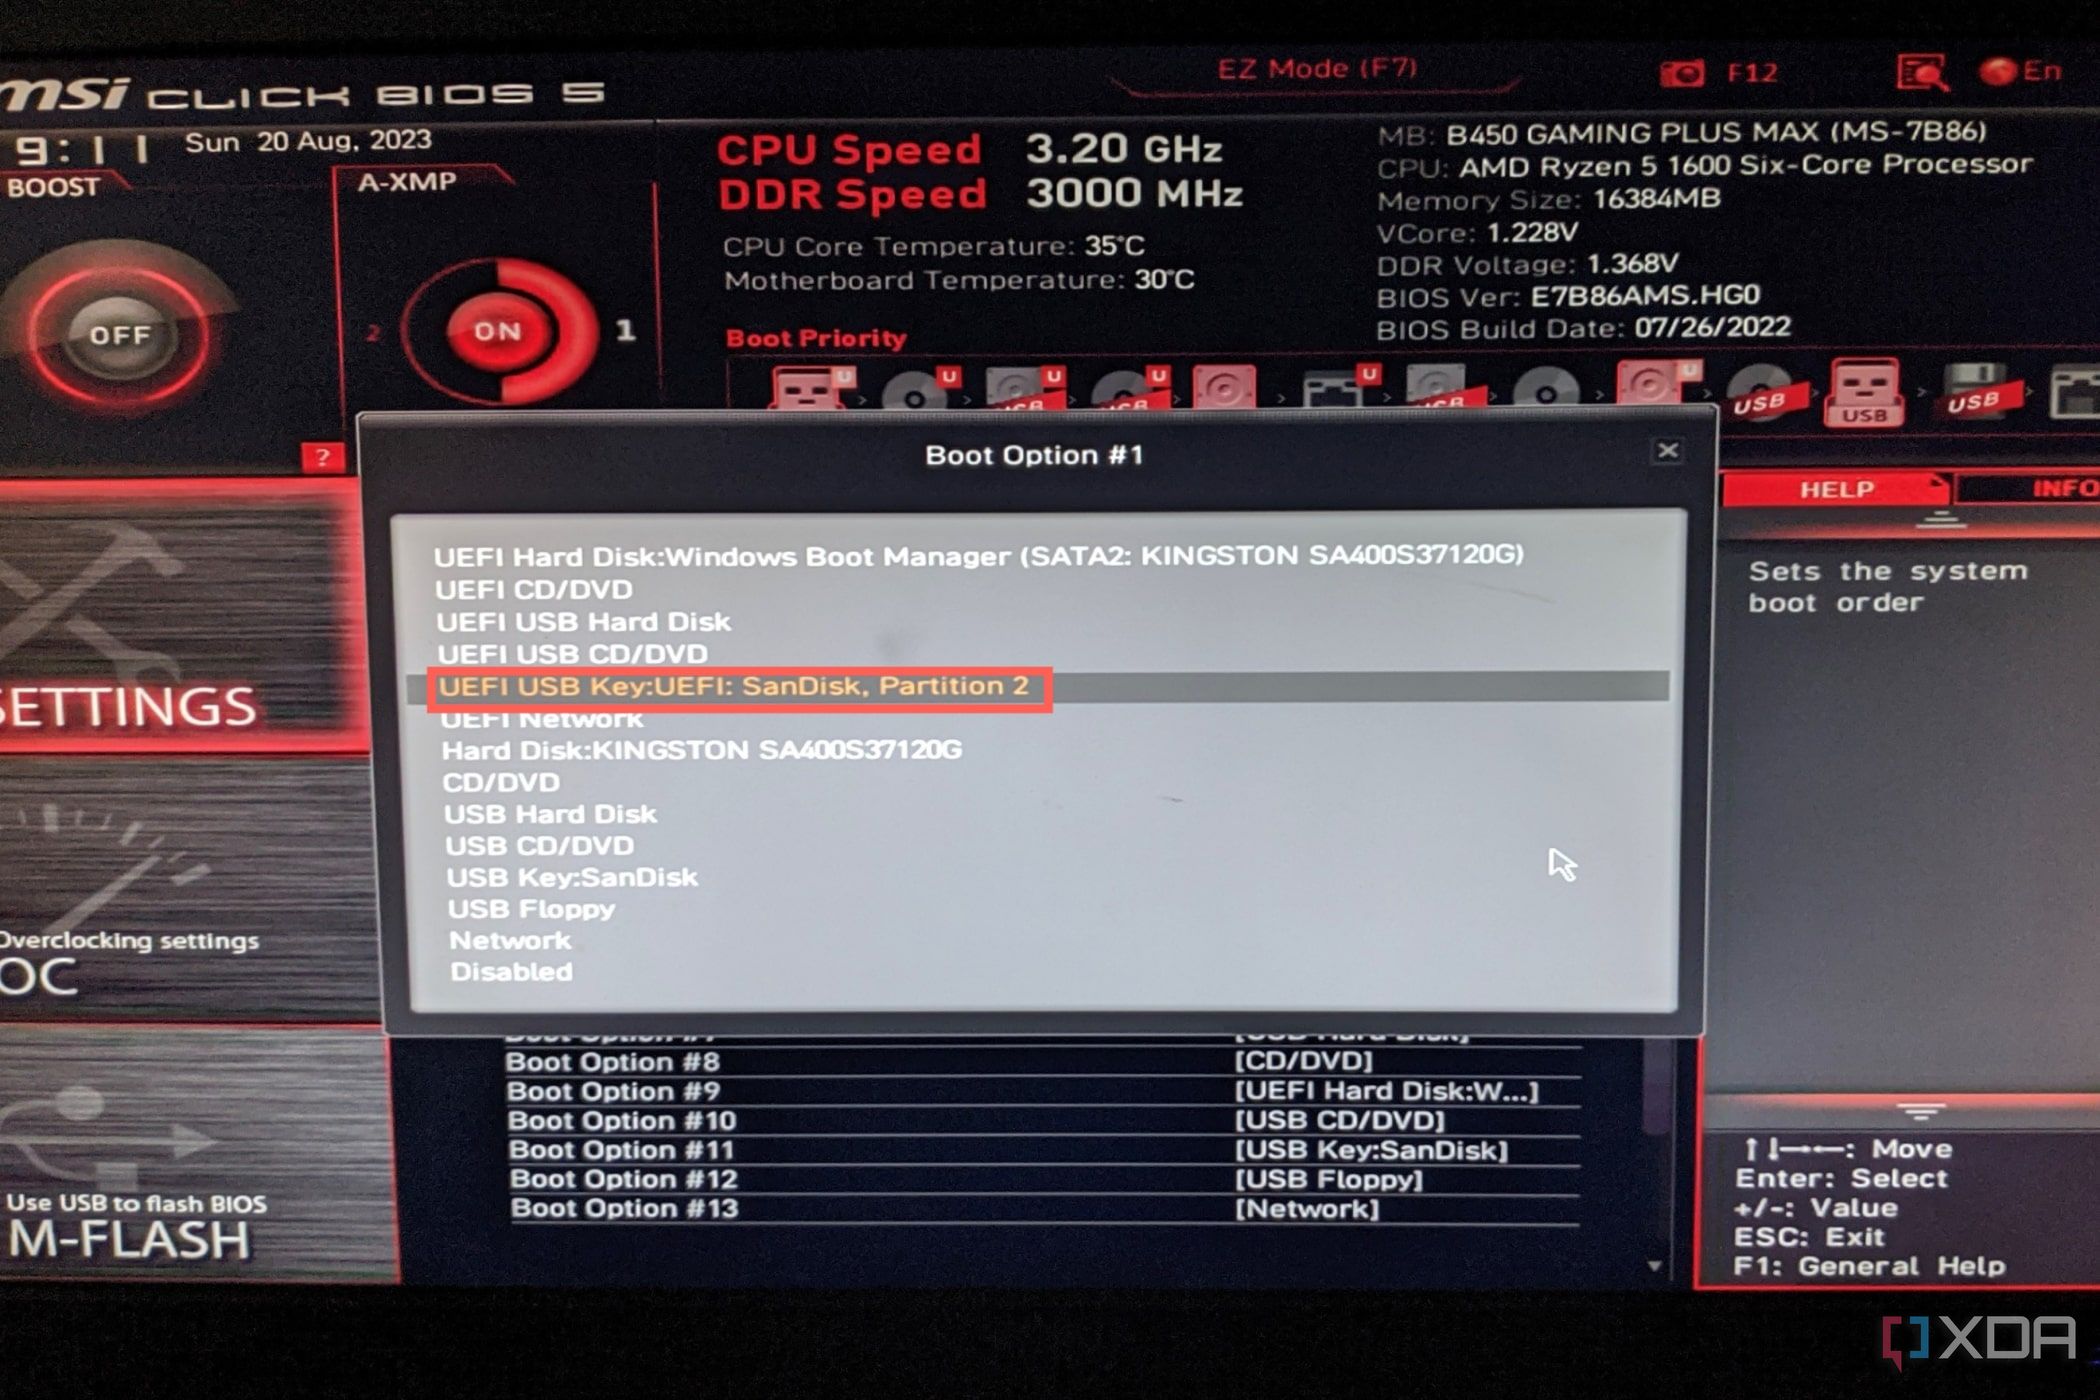 An image of the boot settings of the BIOS of MSI B450 Gaming Plus motherboard